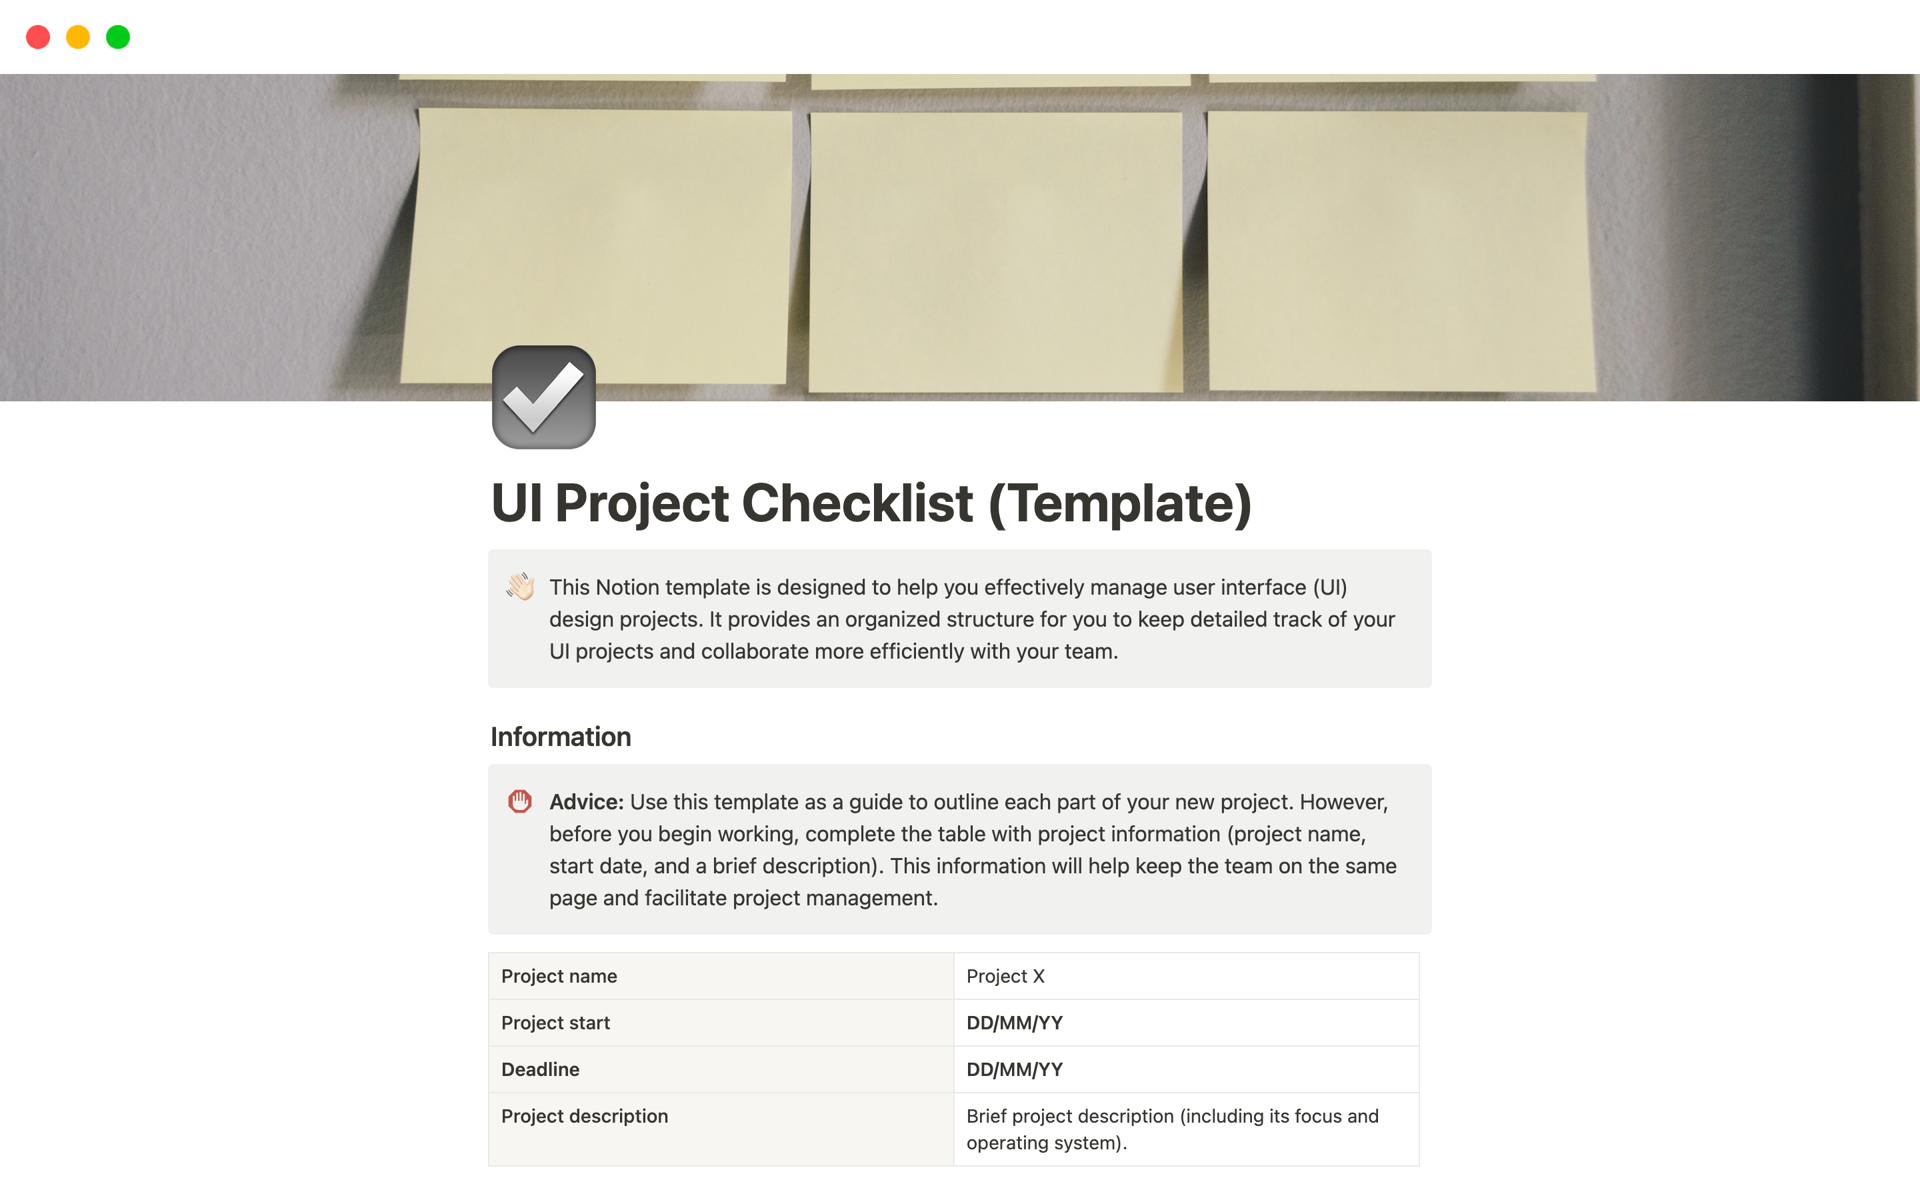 UI Project Checklist in notion